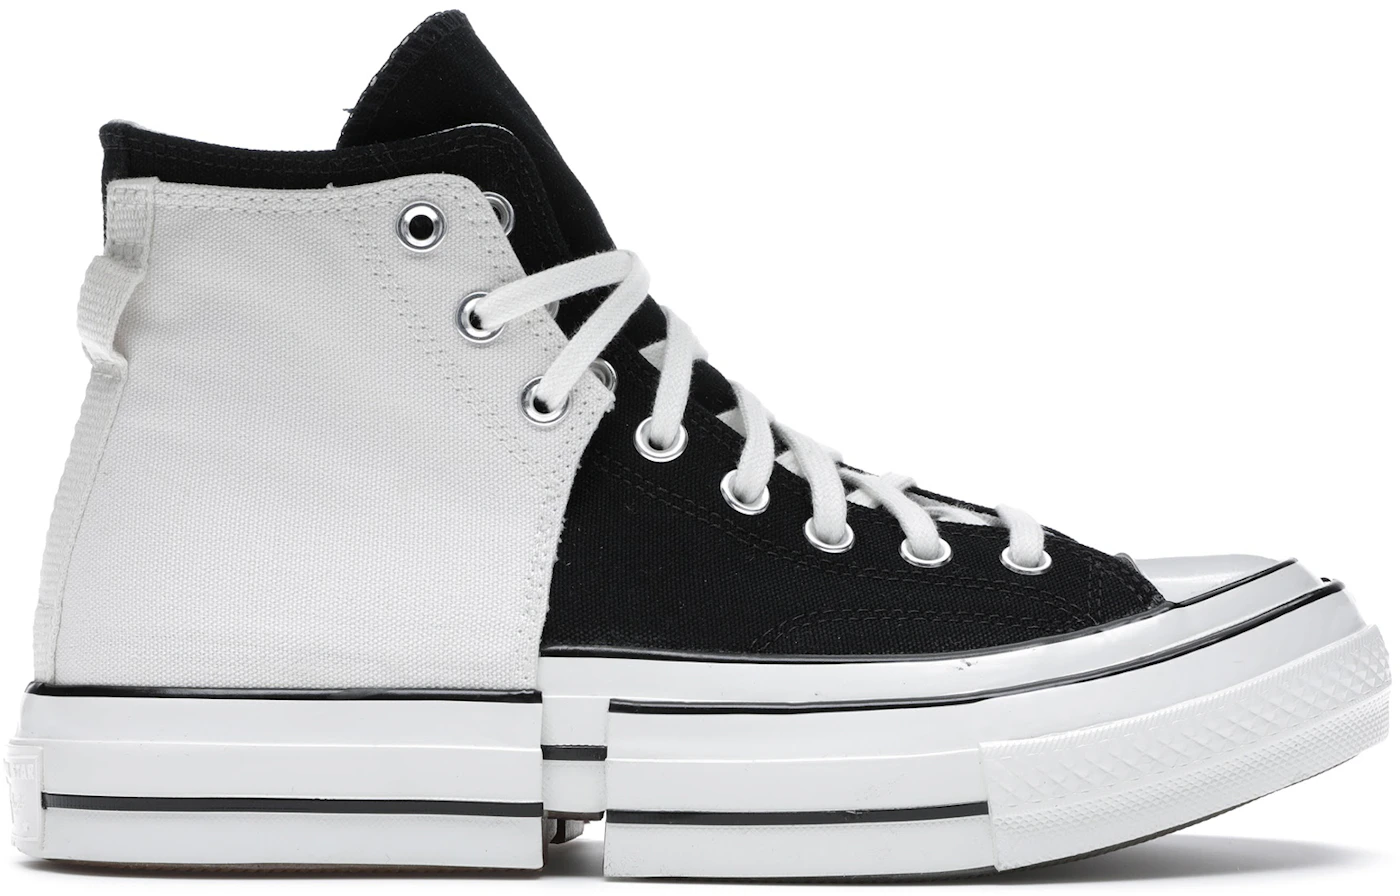 Aftensmad Ti Han Converse Chuck Taylor All-Star 70 Hi Feng Chen Wang 2-in-1 Ivory Black  Men's - 169839C - US